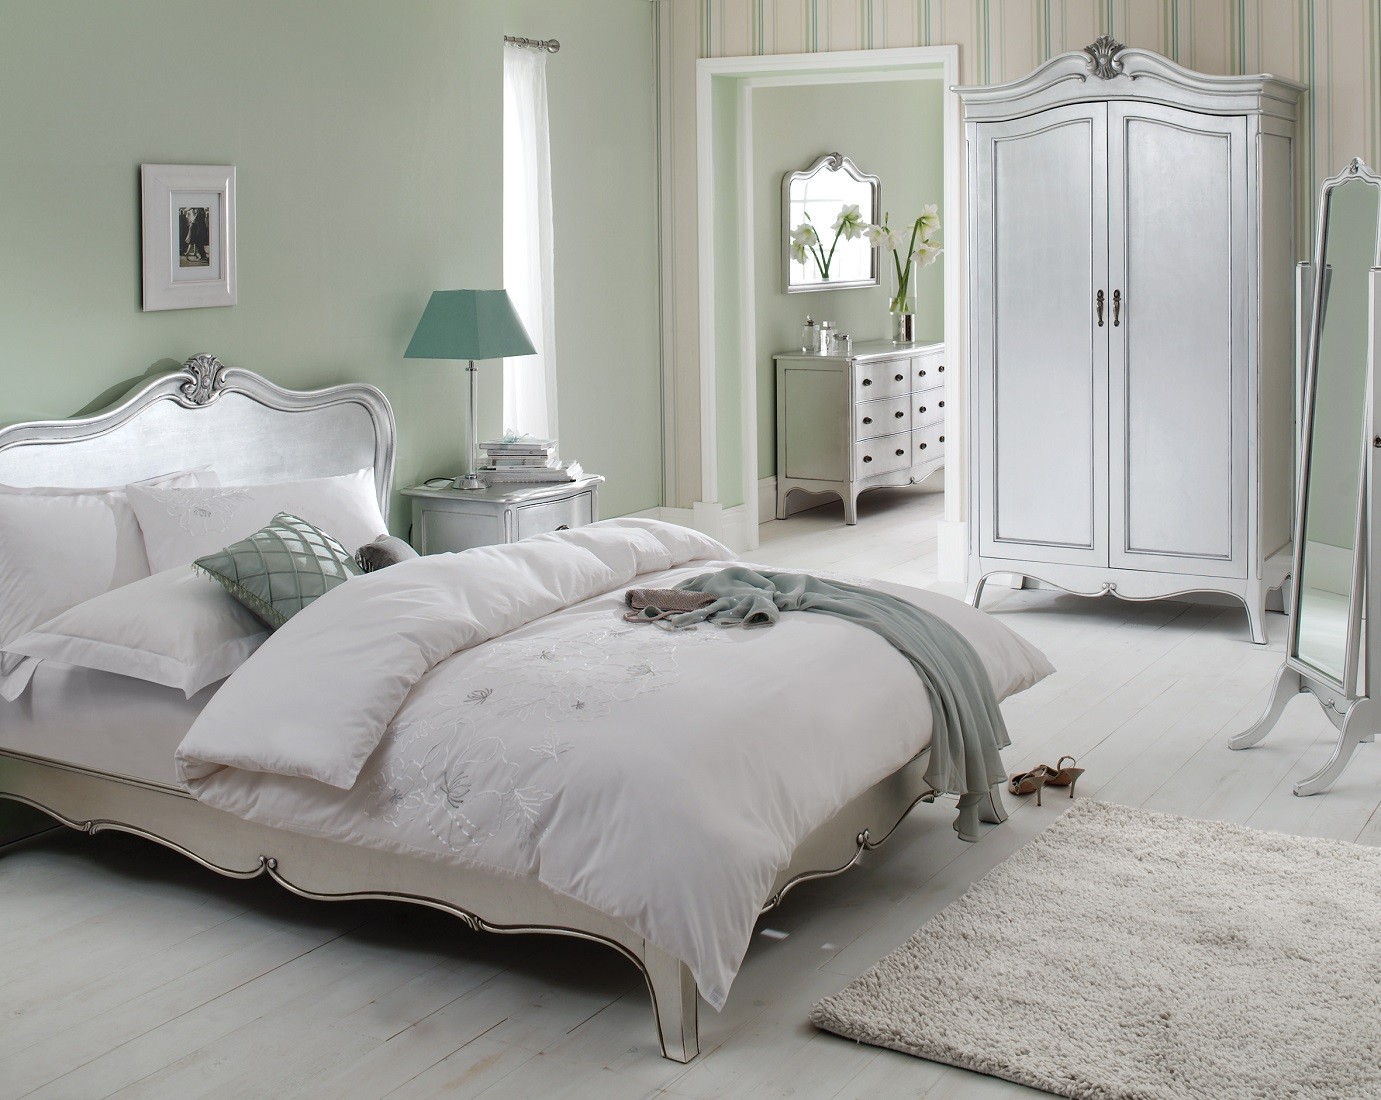 Introducing Silver Leaf Bedroom Furniture - Style Guide